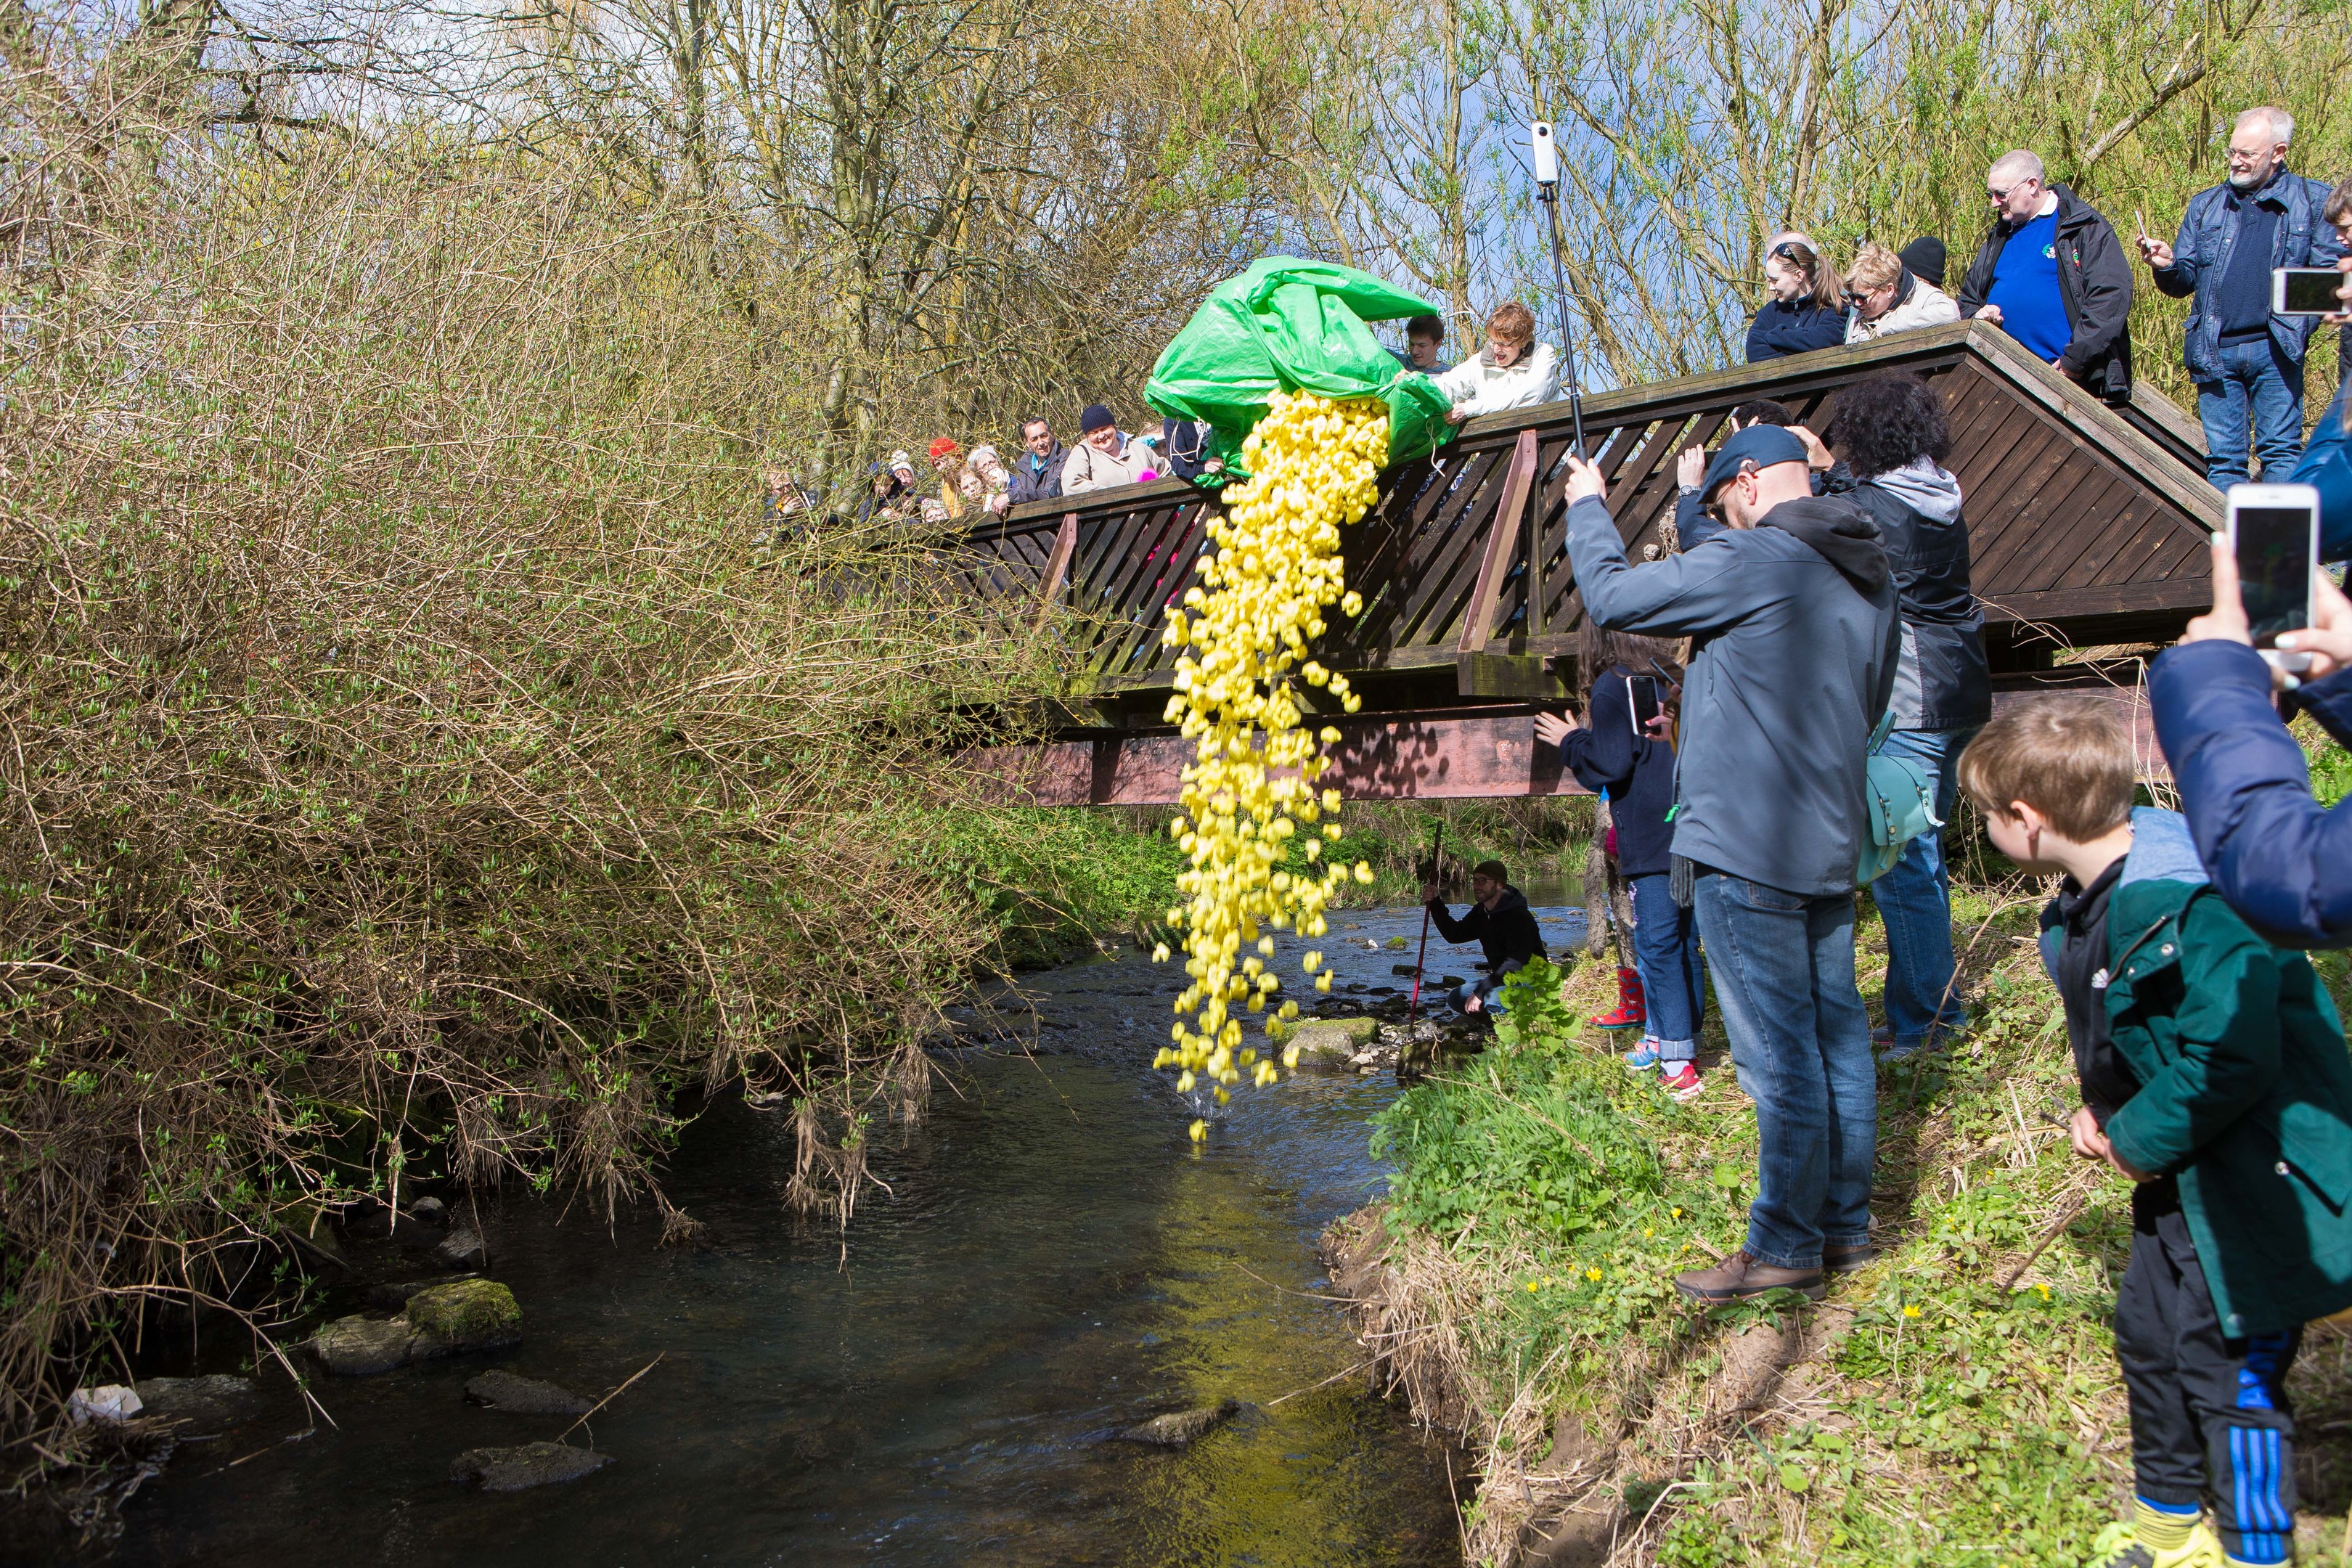 The crowd goes quackers as the duck race begins